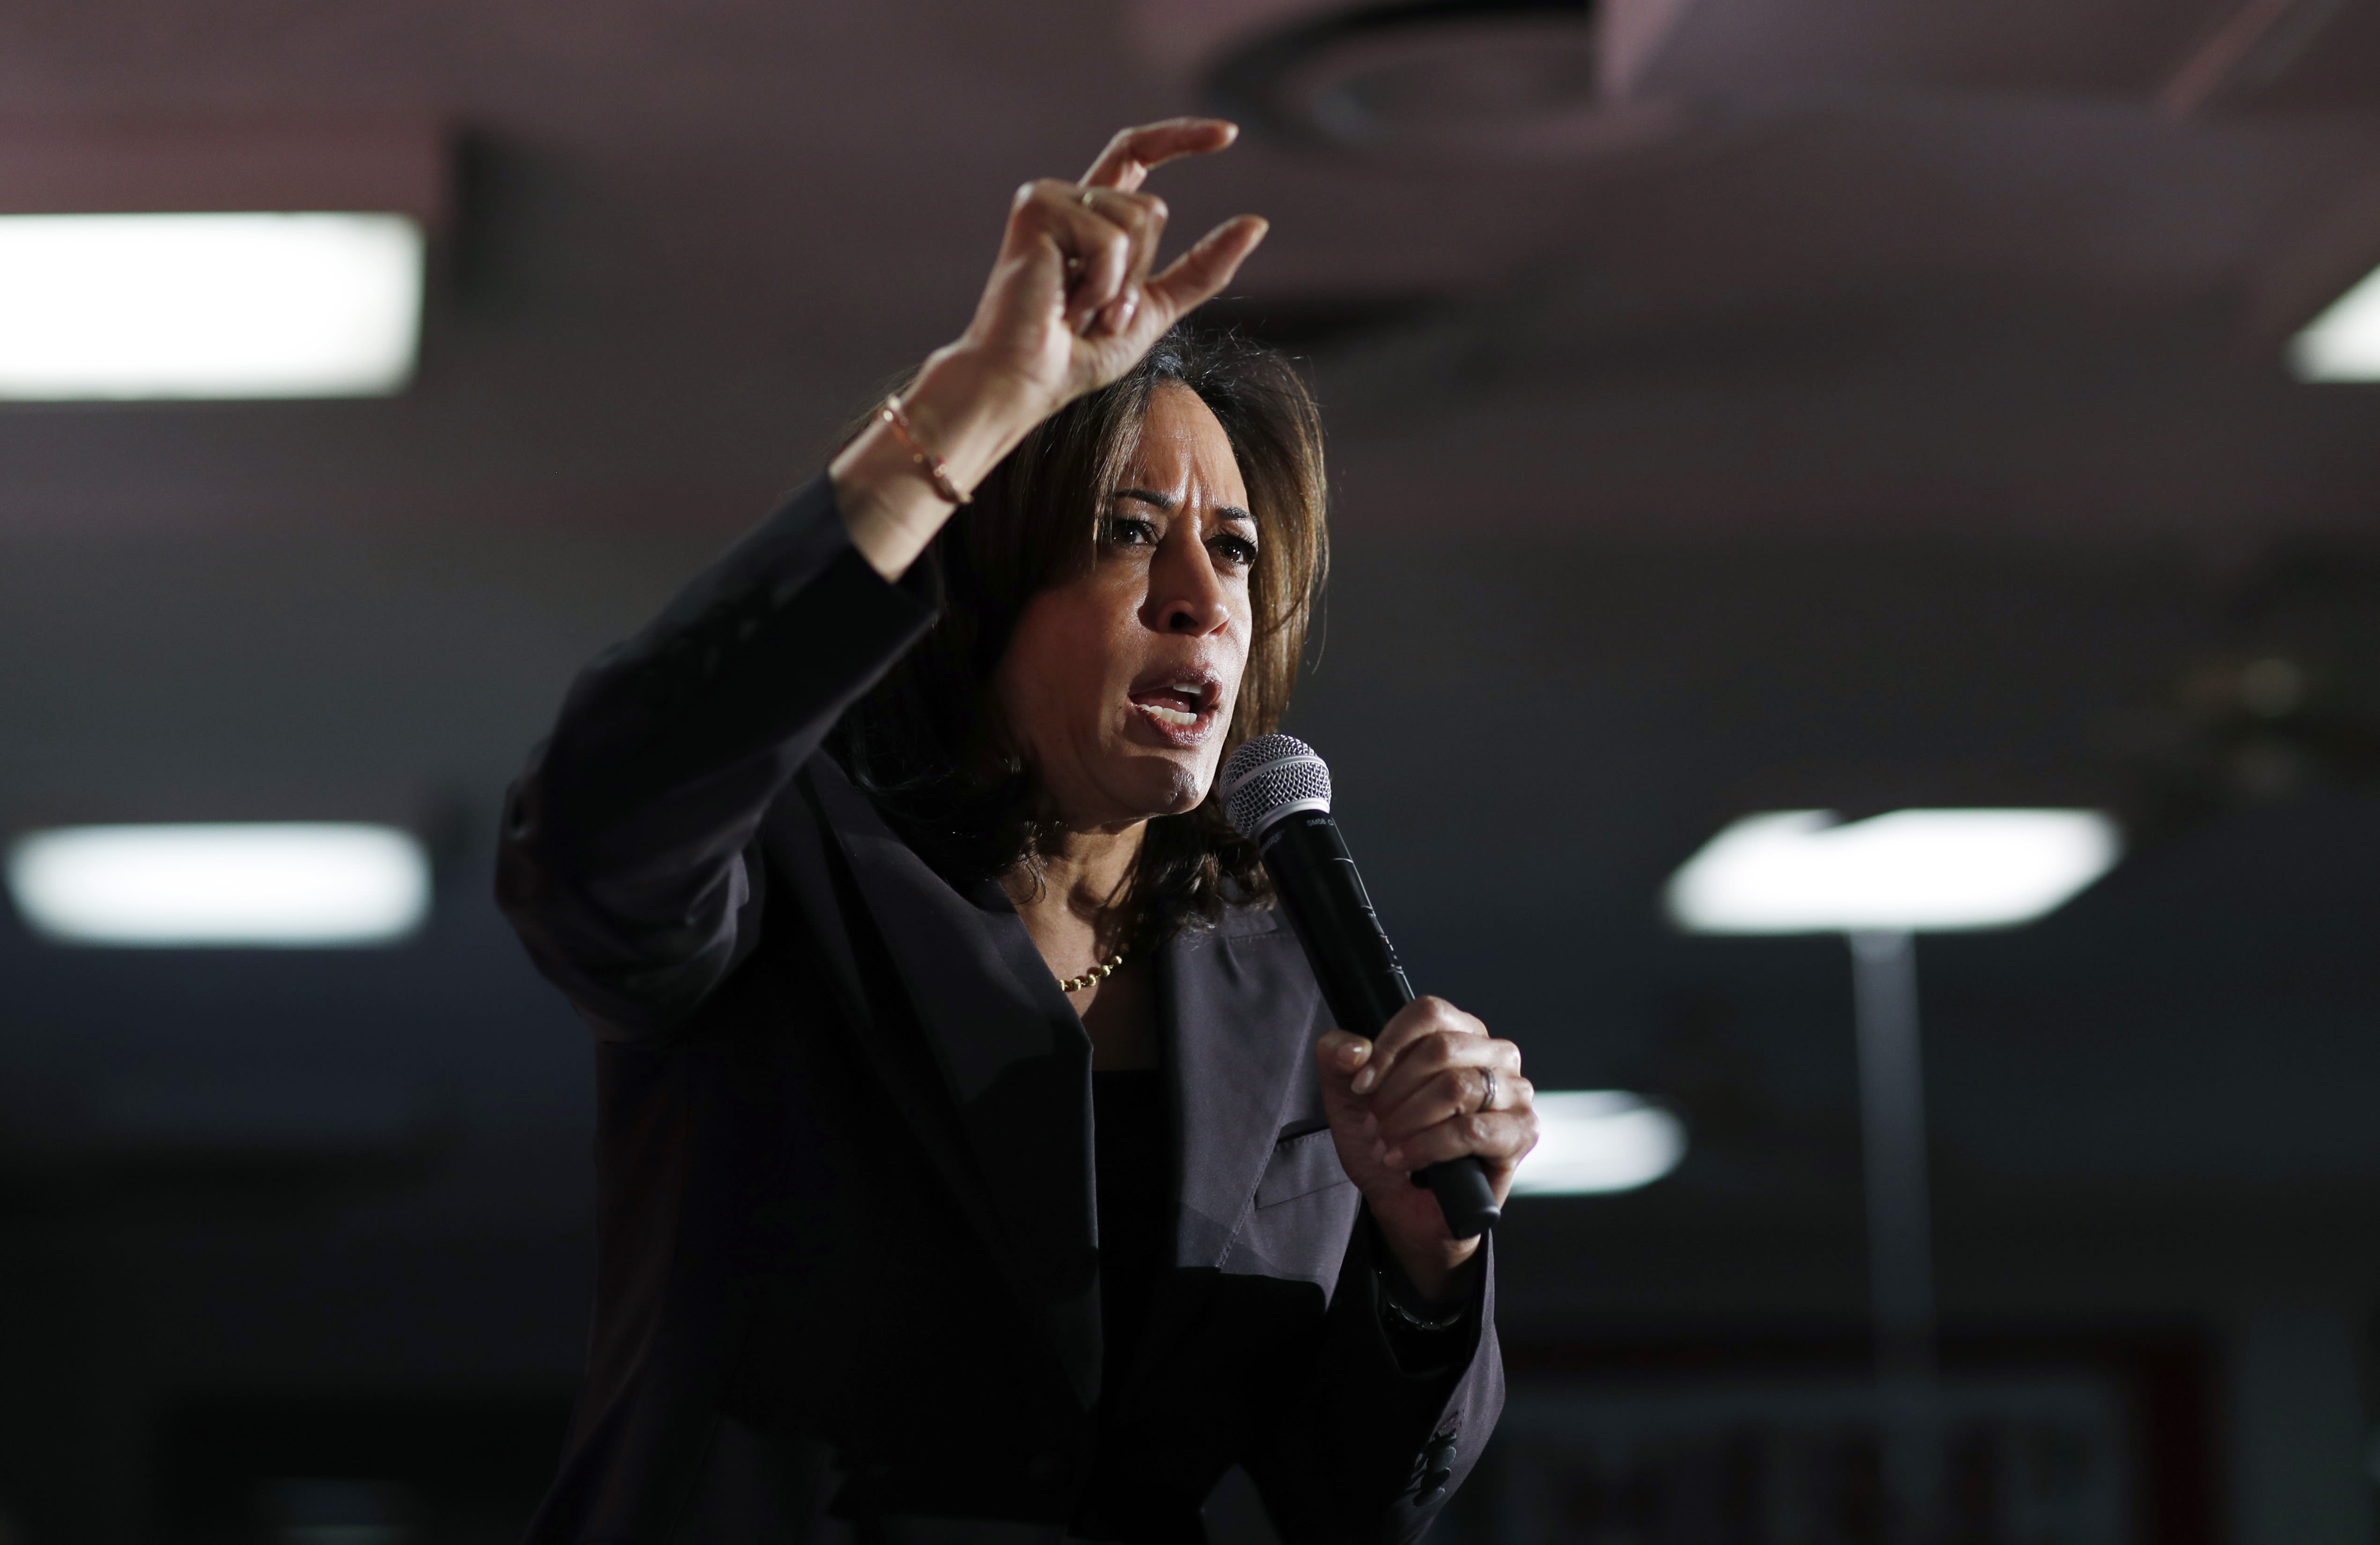 Vice President Kamala Harris met by protesters outside fundraiser in San Francisco